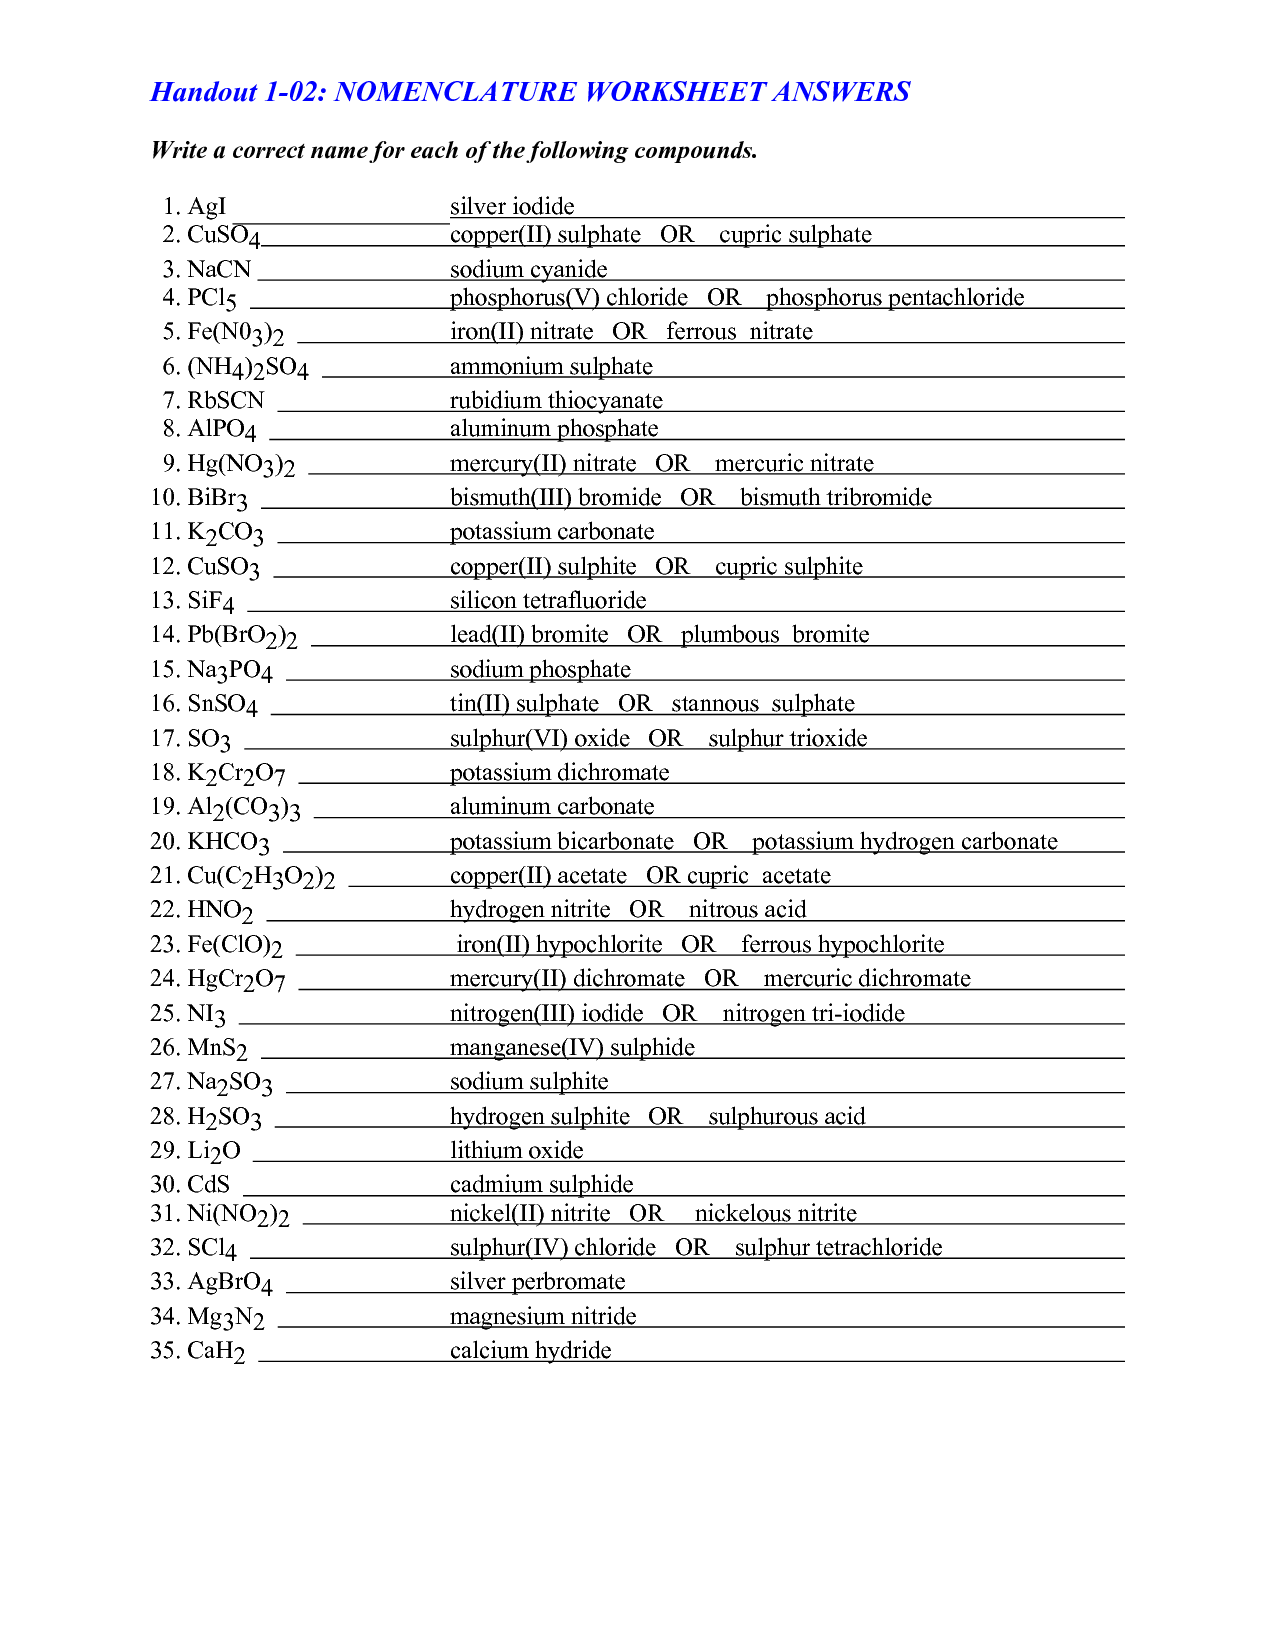 17-best-images-of-naming-organic-compounds-worksheet-answer-organic